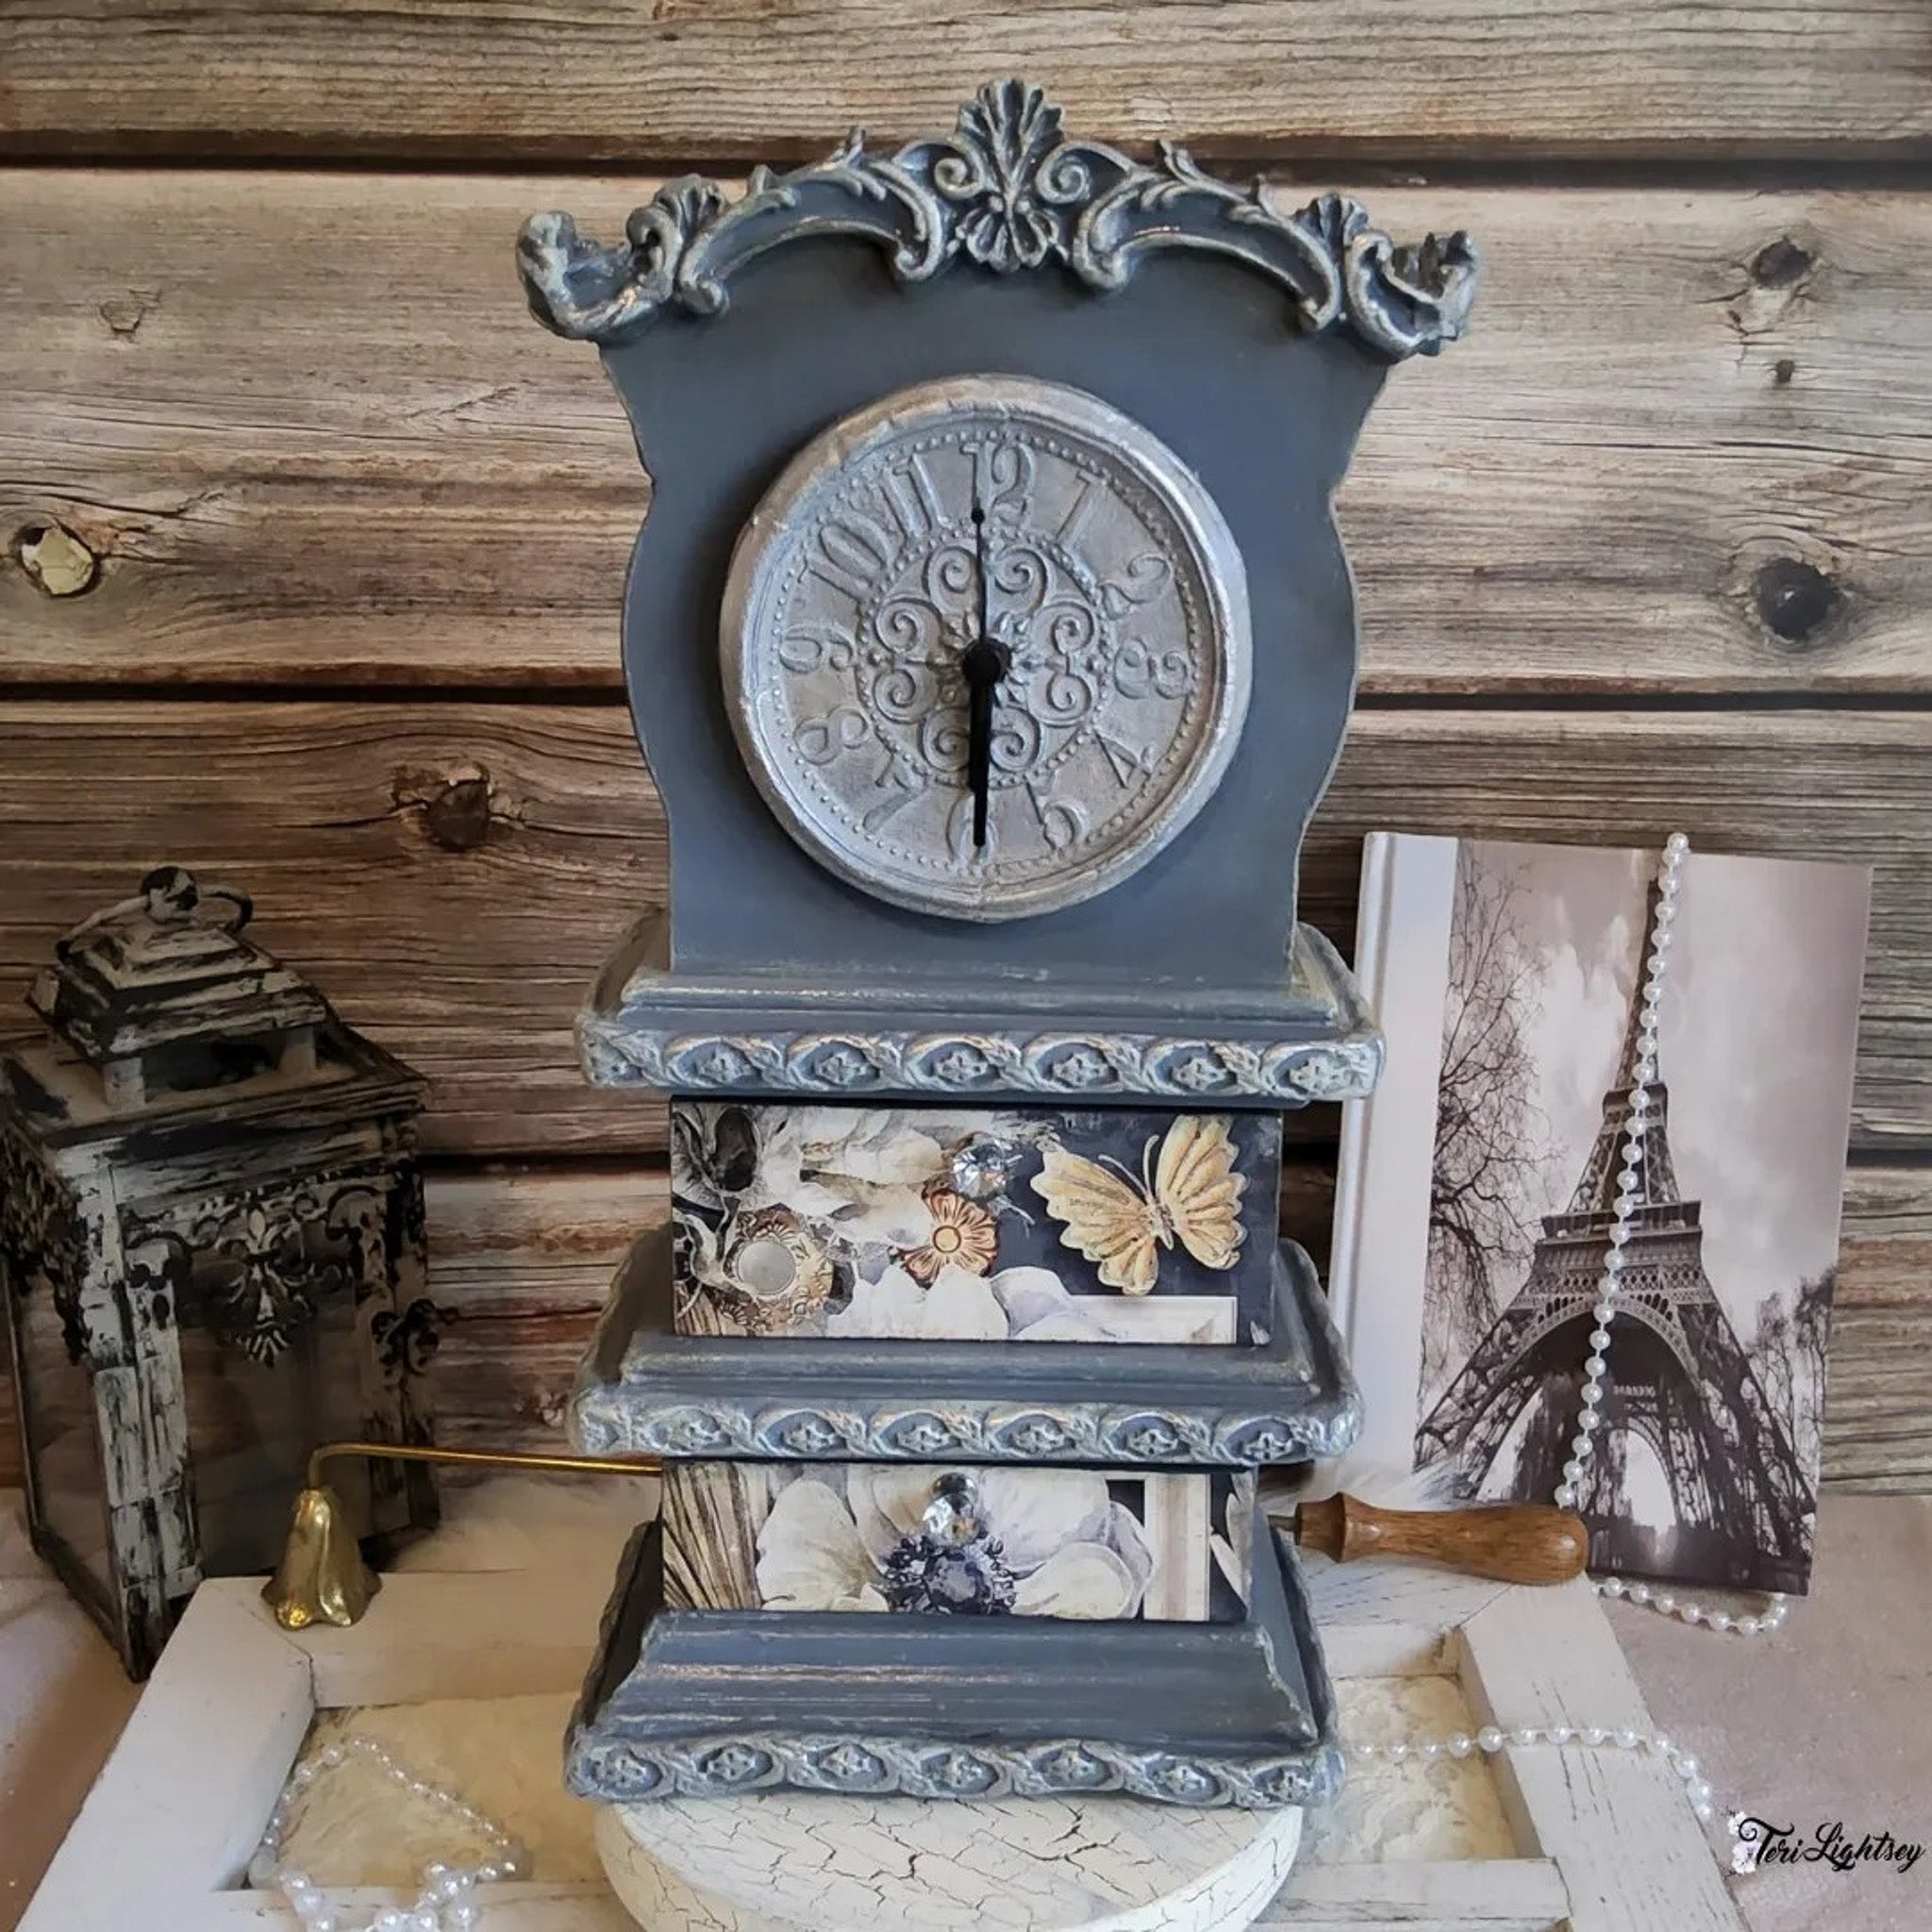 A vintage table clock with 2 drawers refurbished by Teri Lightsey is painted a muted blue and features Decoupage Queen's Sugar Magnolia A3 rice paper on the drawers.